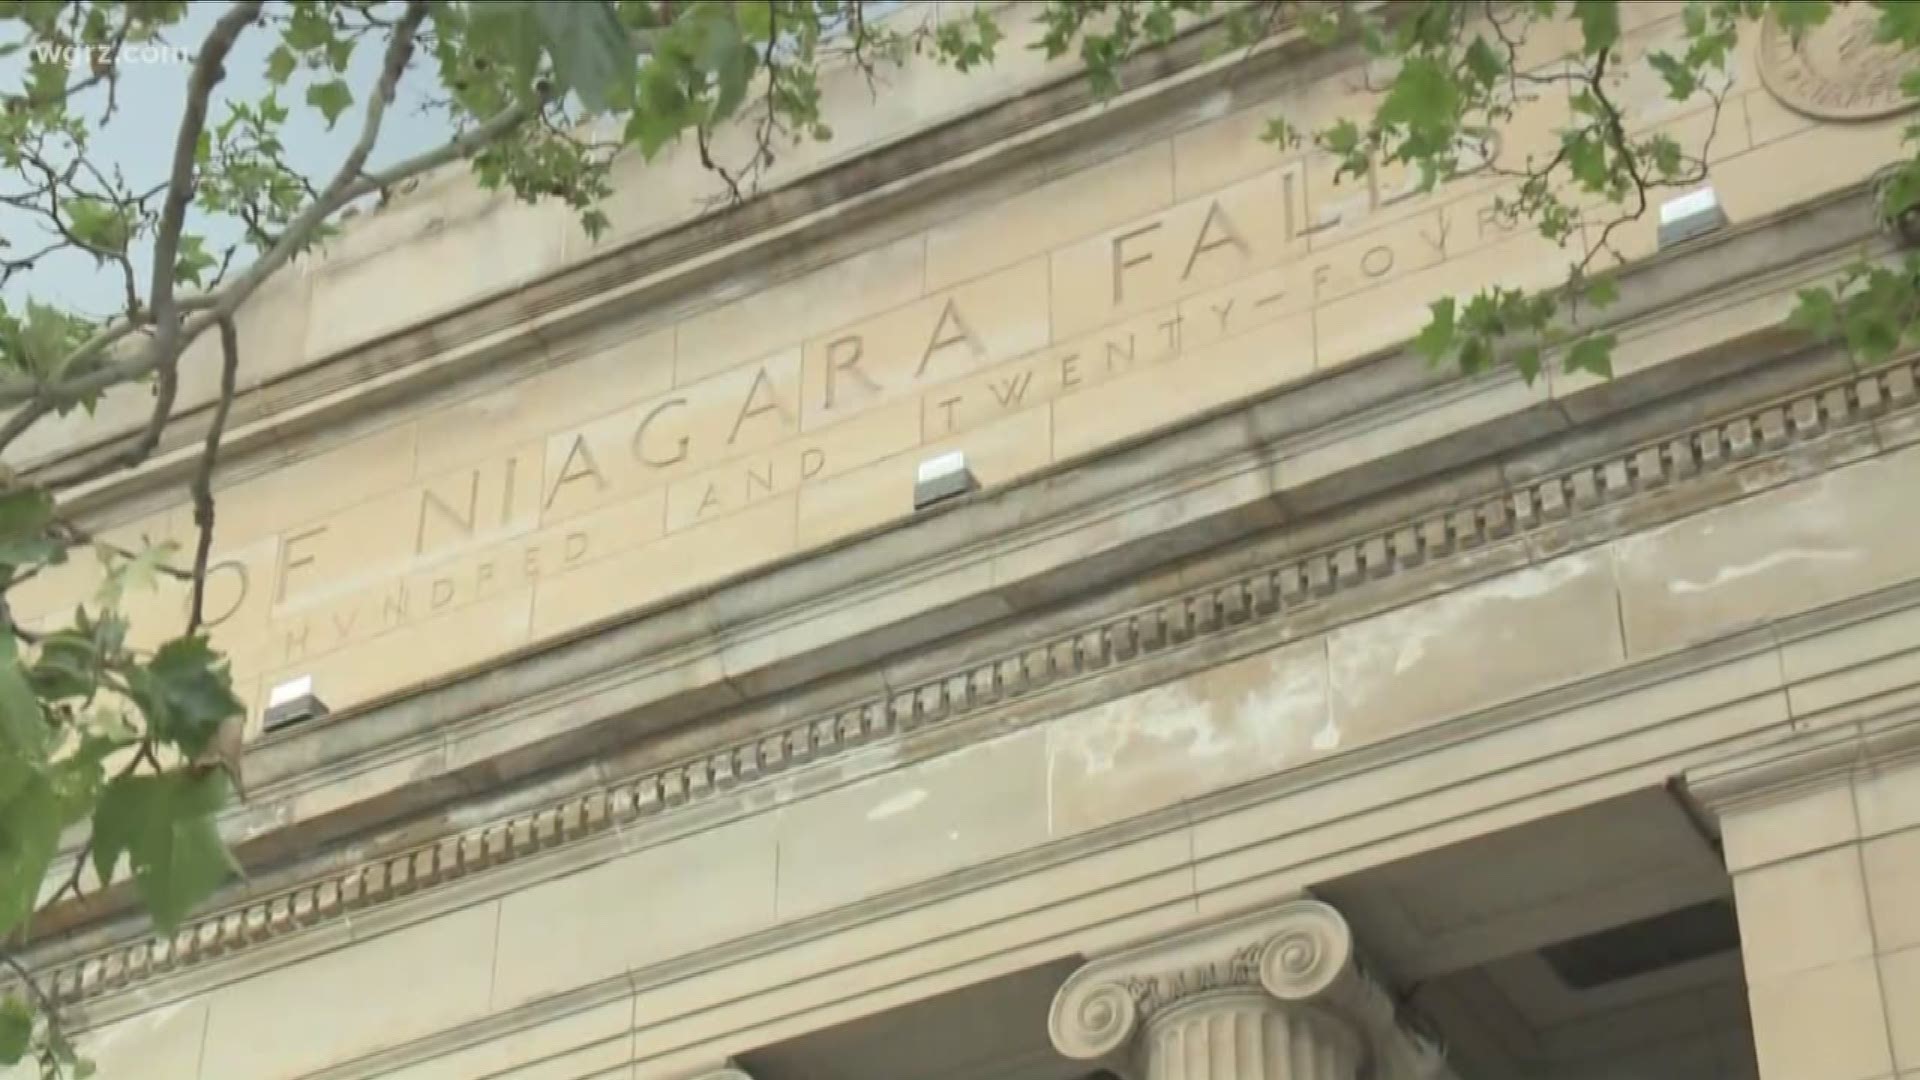 Niagara Falls To Get $12.3M From State